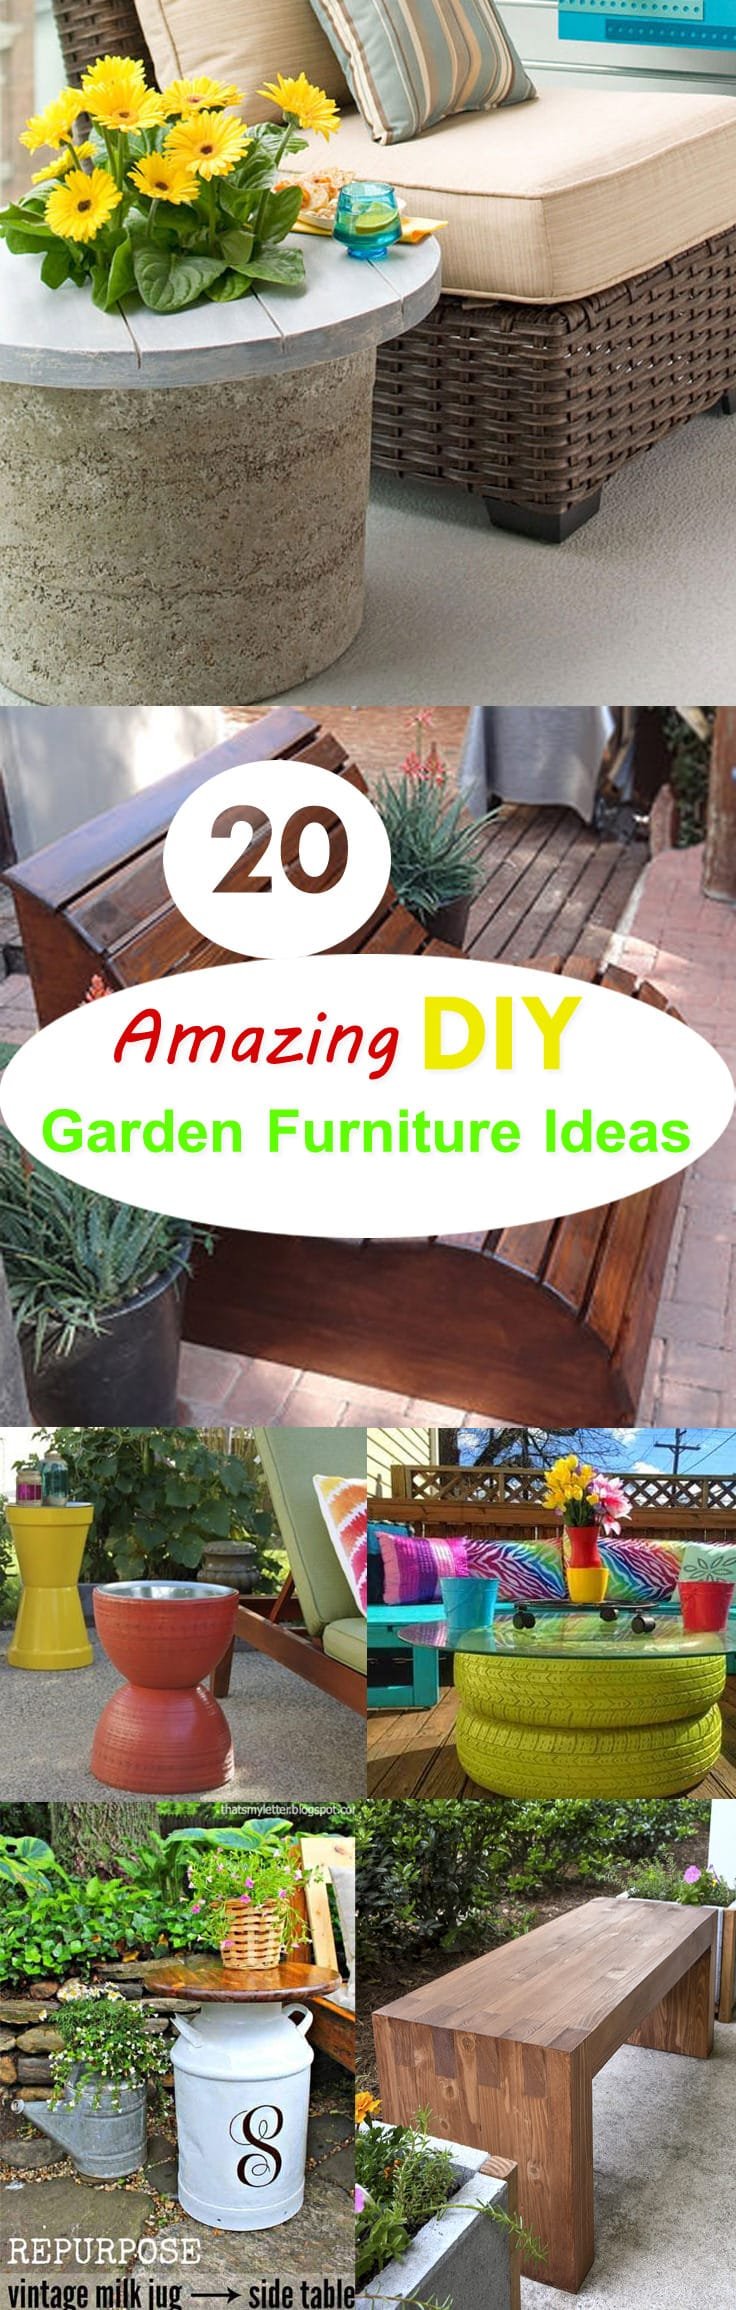 If you are good at doing DIY stuff you don't need to spend a lot of money to have awesome furniture for your outdoor space. Check out these 20 DIY garden furniture ideas for inspiration.